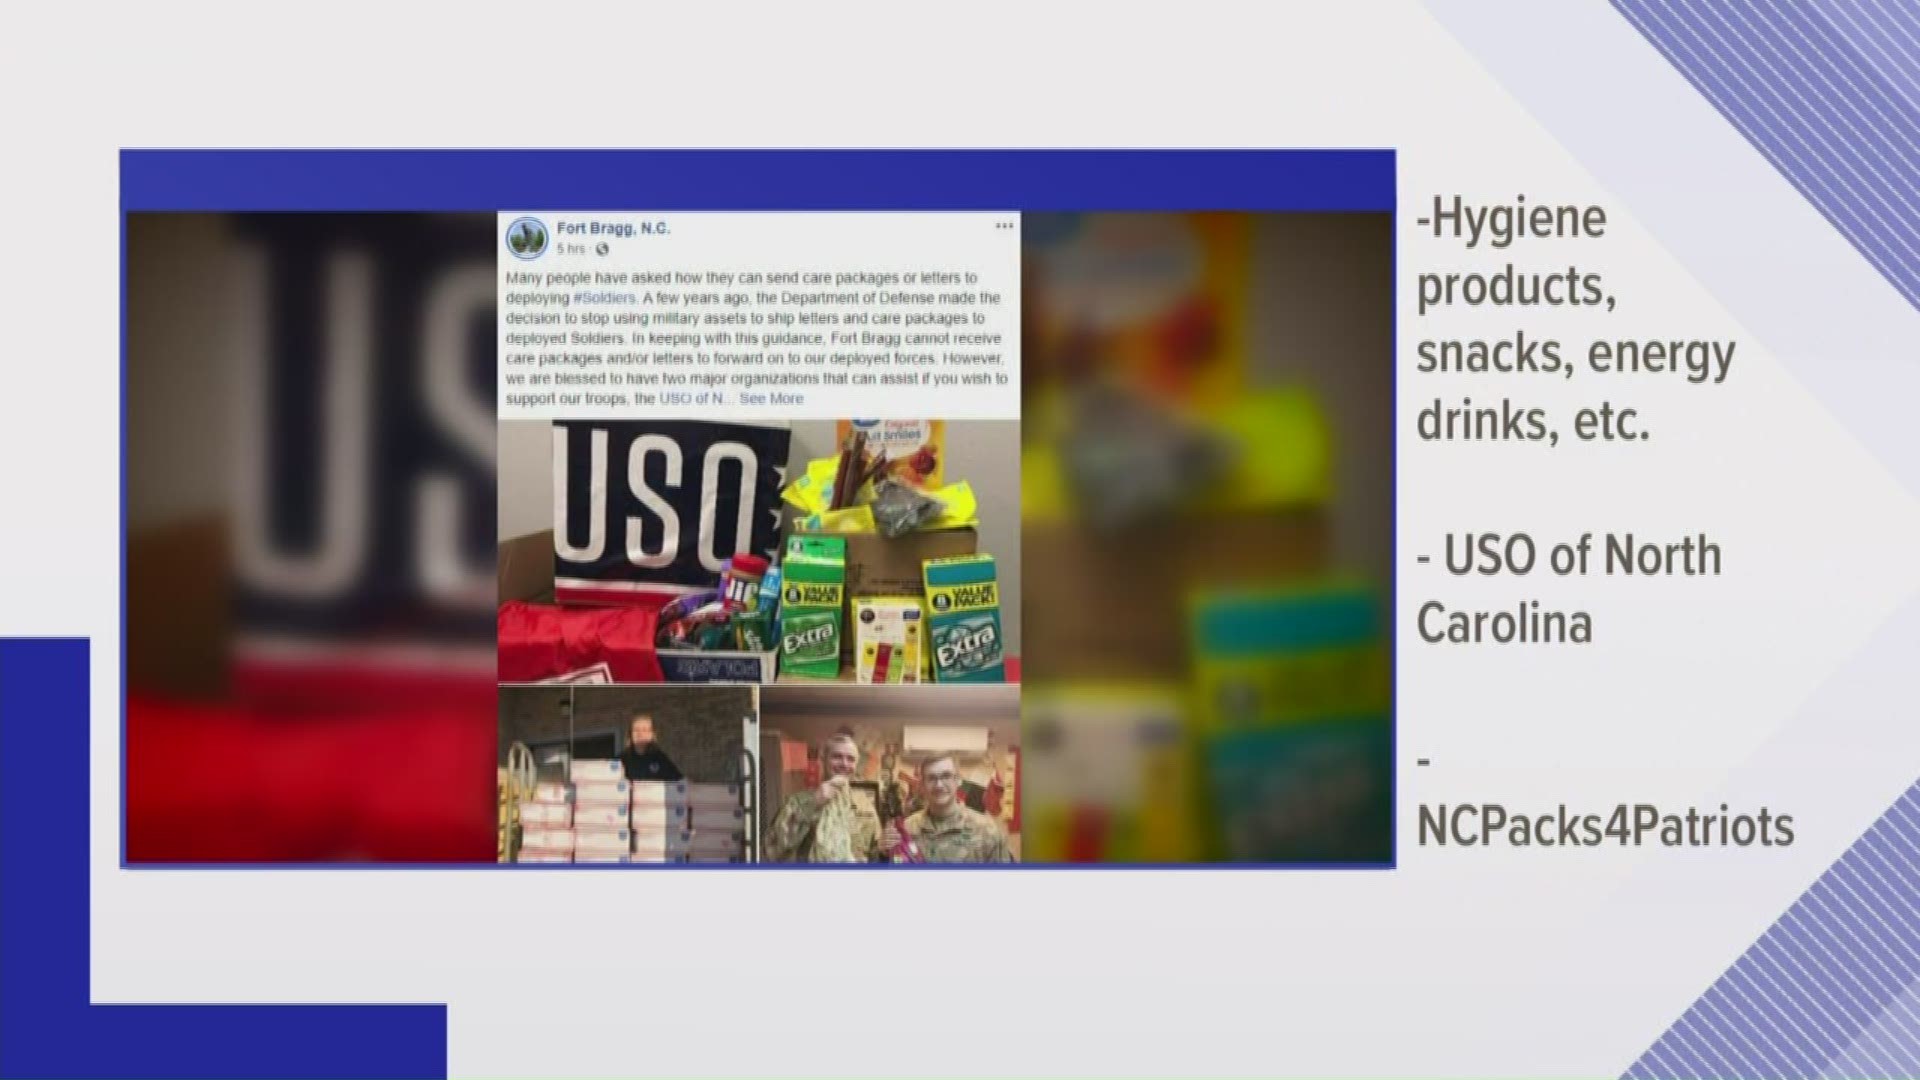 Fort Bragg is offering information on how you can send care packages to soldiers before they deploy.